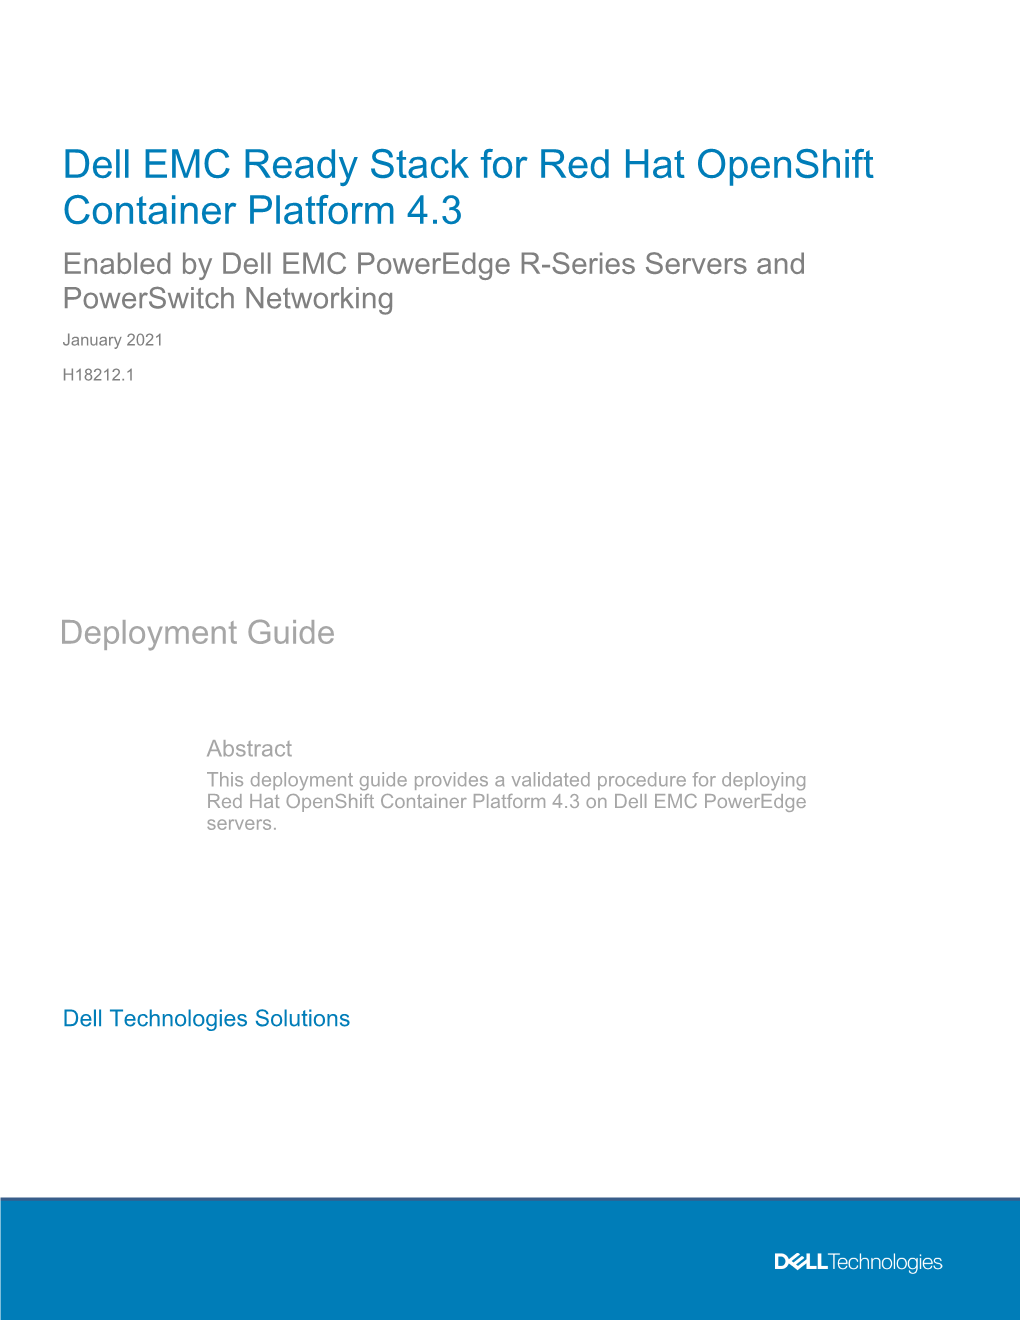 Dell EMC Ready Stack for Red Hat Openshift Container Platform 4.3 Enabled by Dell EMC Poweredge R-Series Servers and Powerswitch Networking